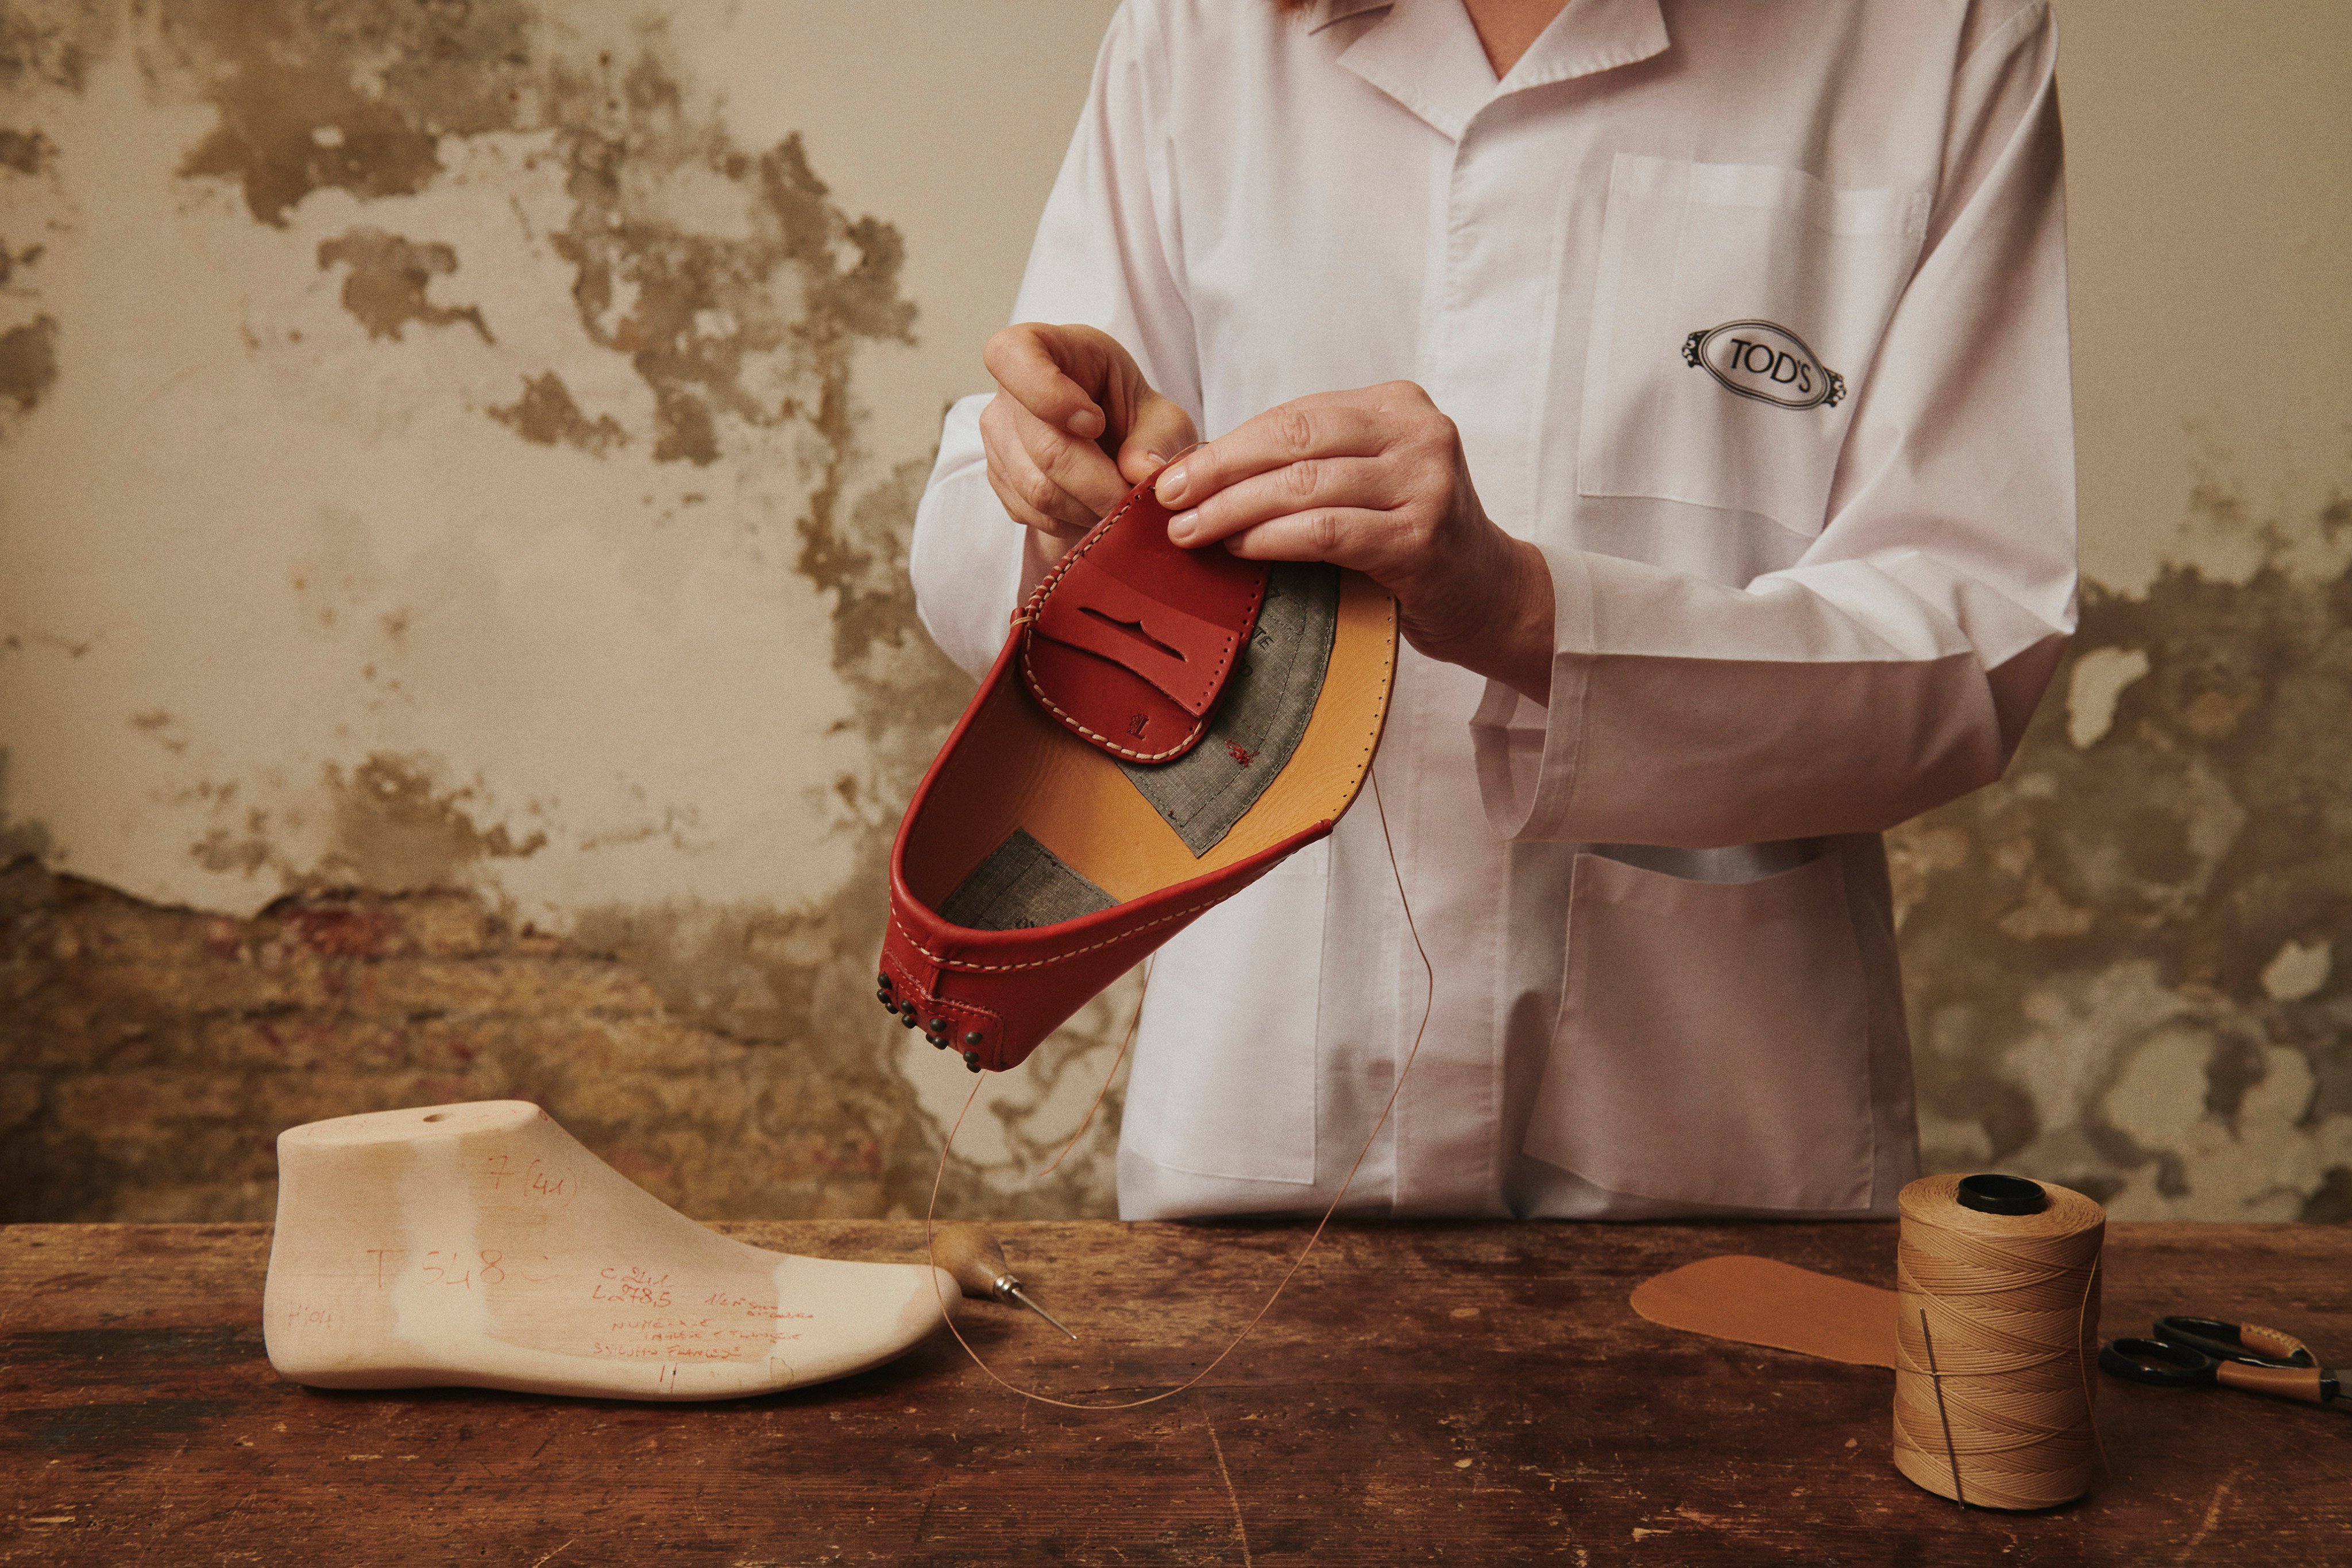 Tod’s latest exhibition showed its unwavering support for Italian artistry, featuring craftsmen including glass artists and gold-leaf beaters, and nodding to the brand’s iconic Gommino shoe. Photos: Handout